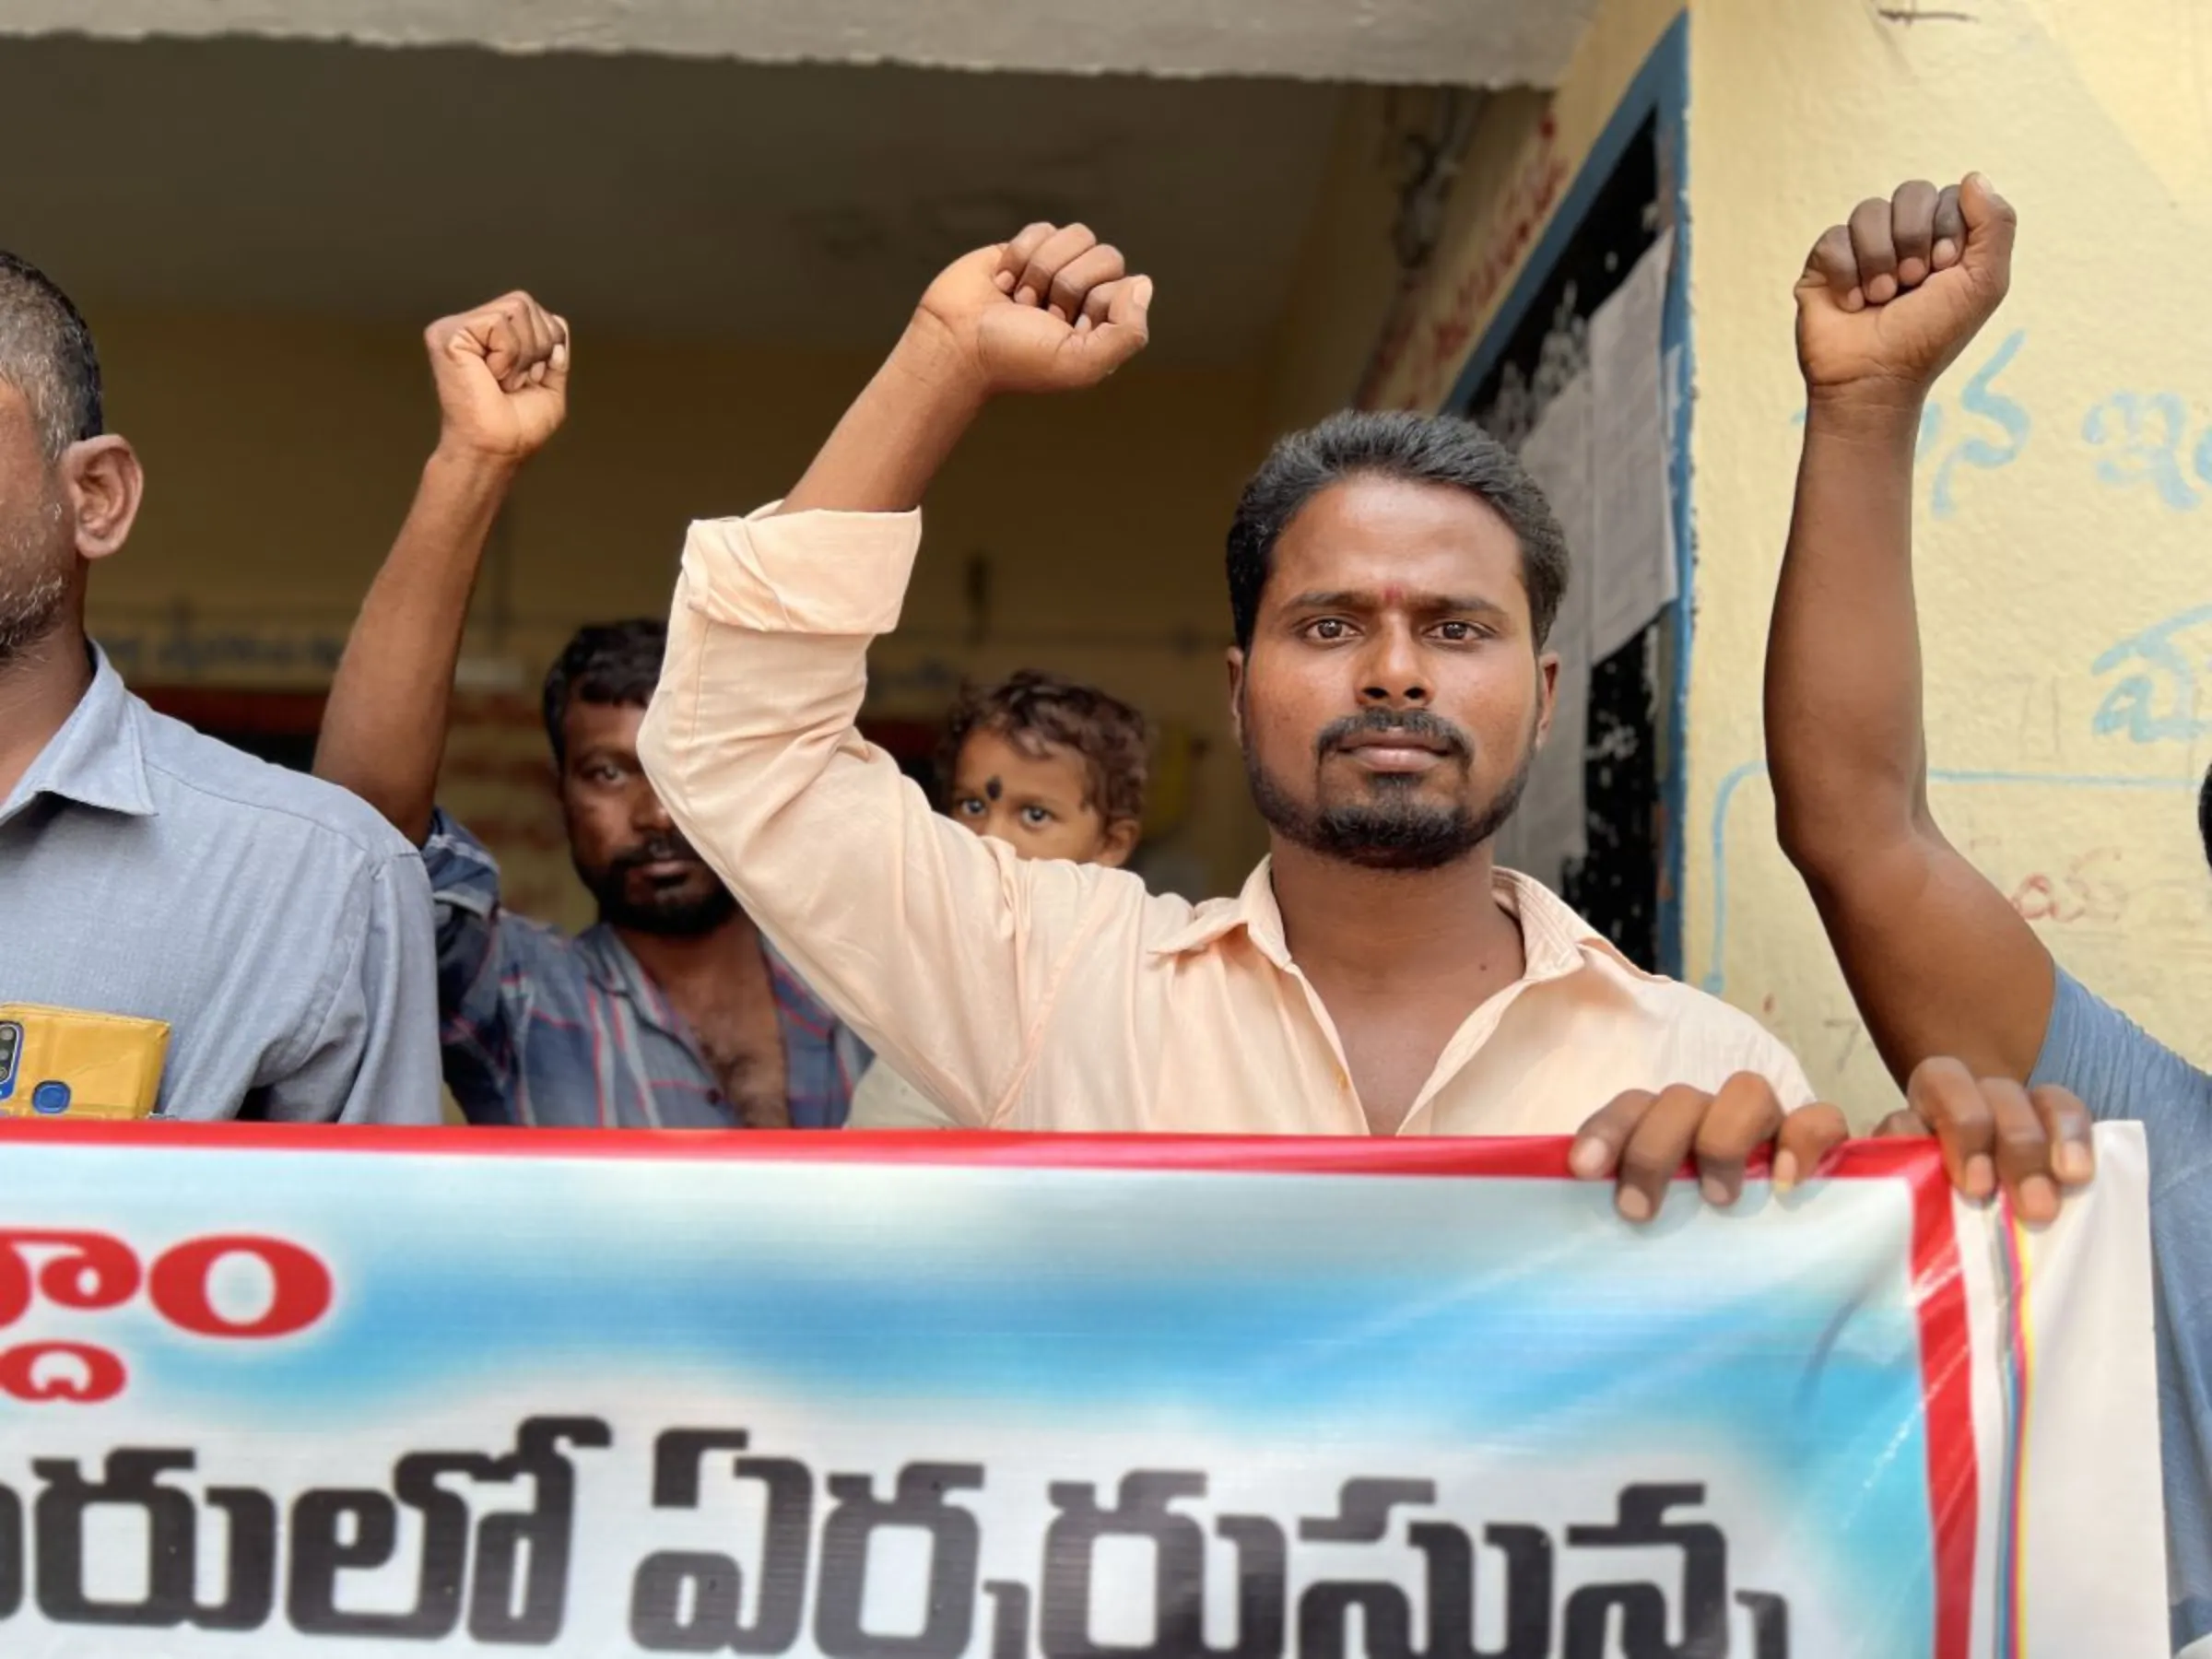 Chittanur residents protest against a new ethanol factory in their backyard, which they say was approved without consulting them, in Telangana state, India, October 17, 2023